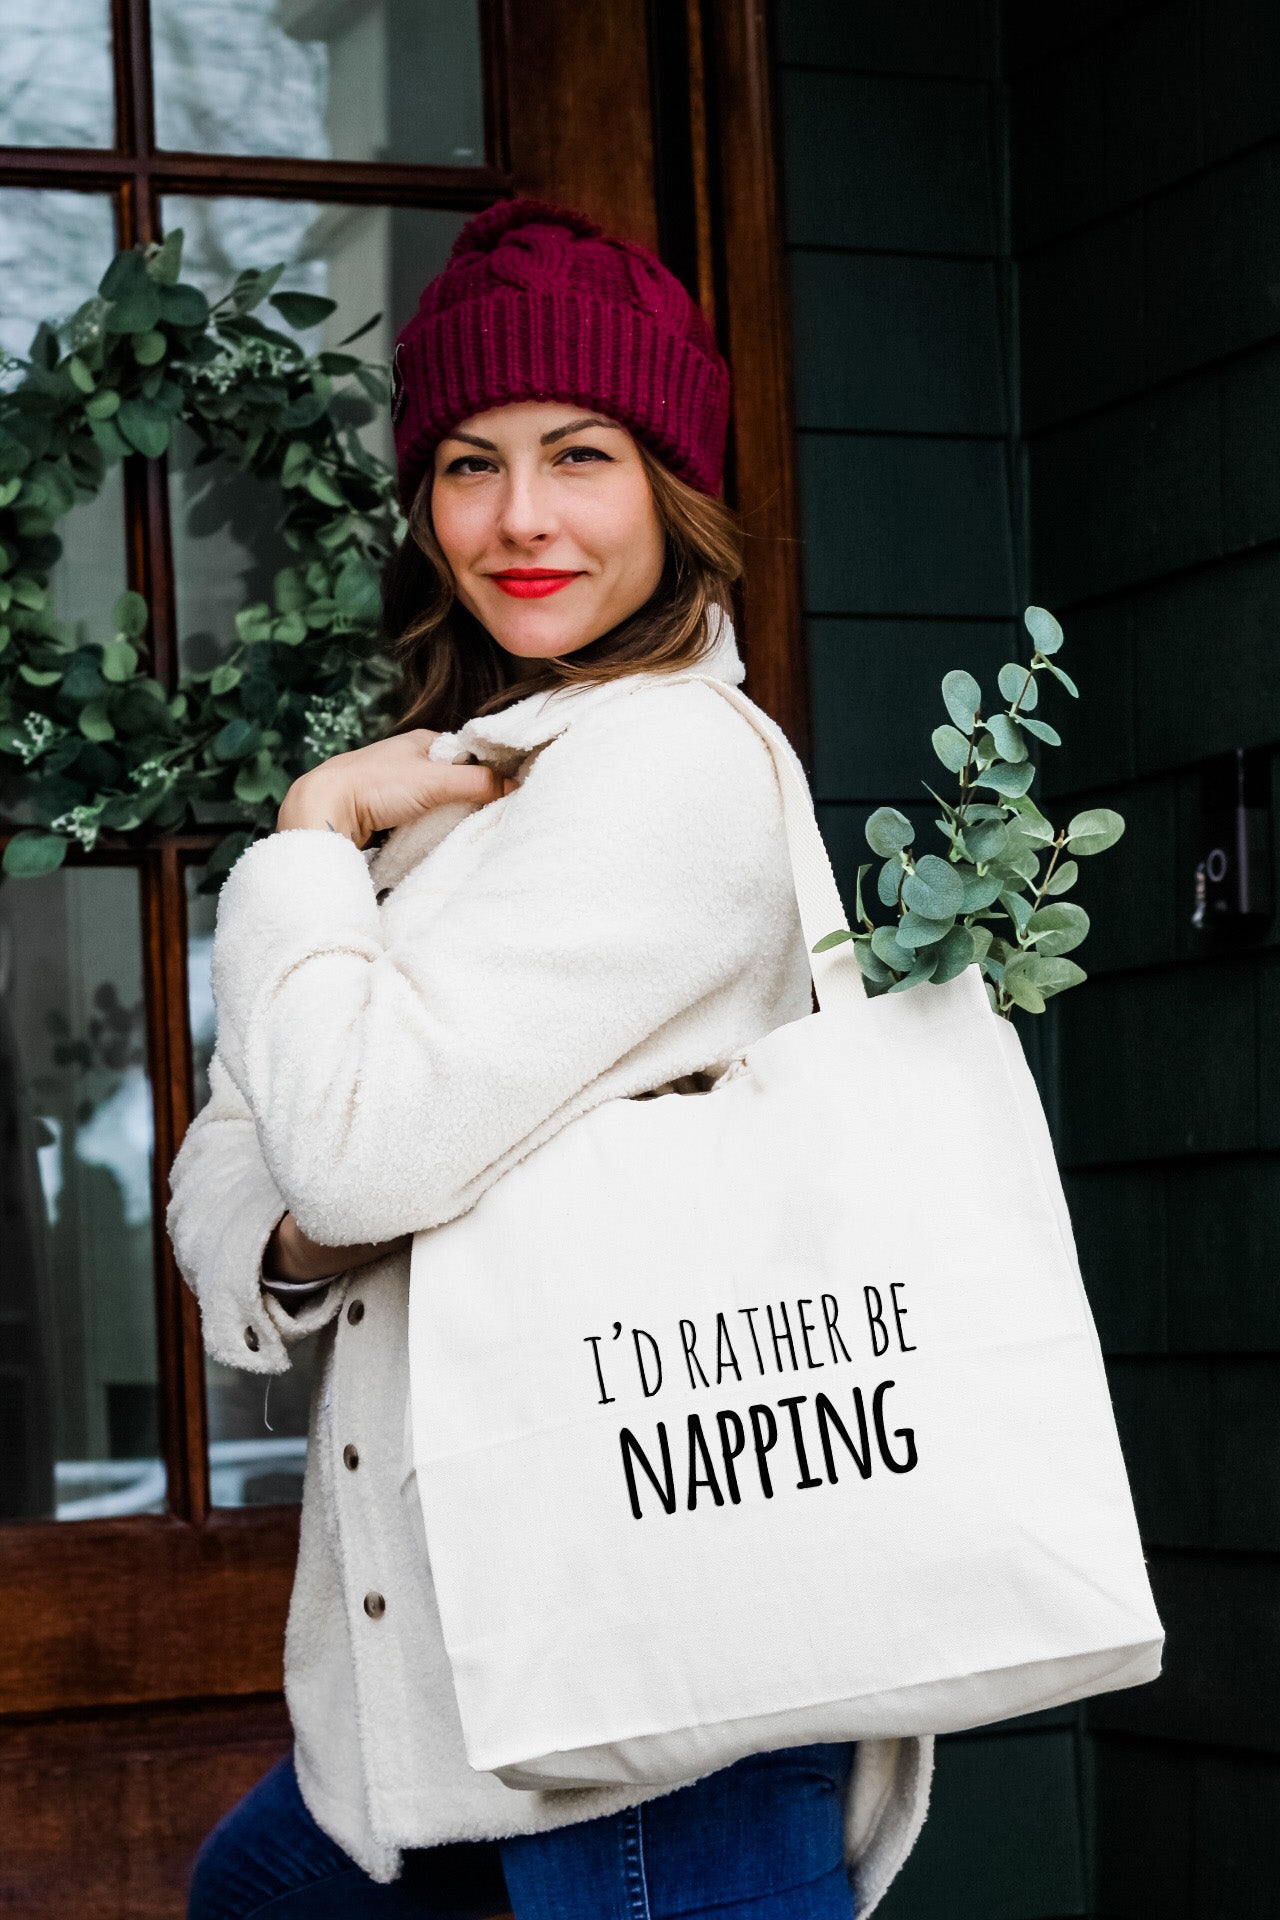 I'd Rather Be Napping - Tote Bag - MoonlightMakers